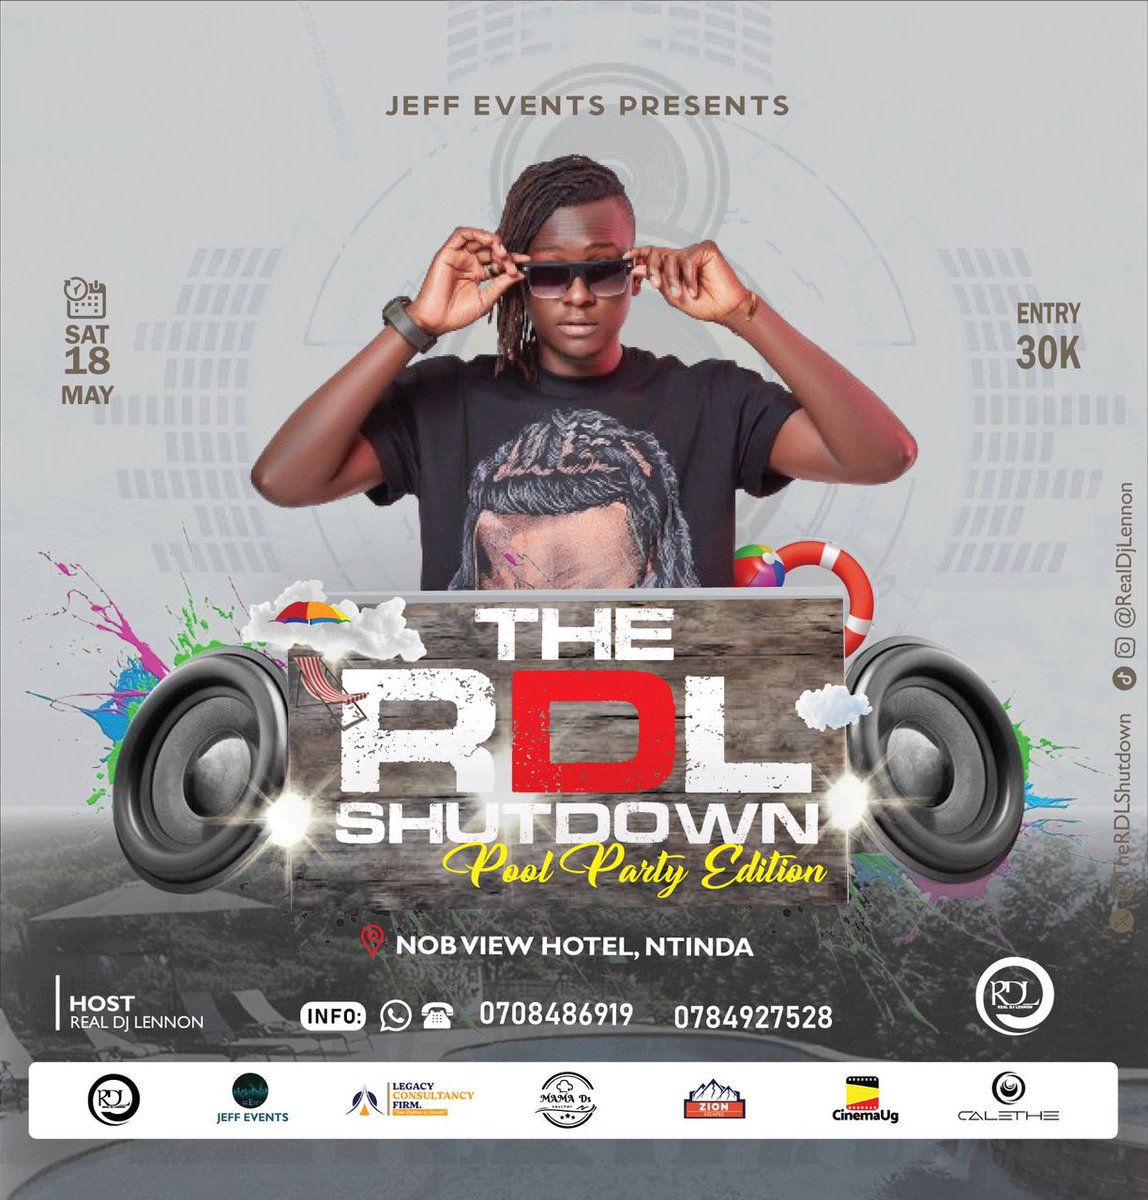 #TheRDLShutdown is happening on 18th May at Nob View Hotel. Tickets are 30K